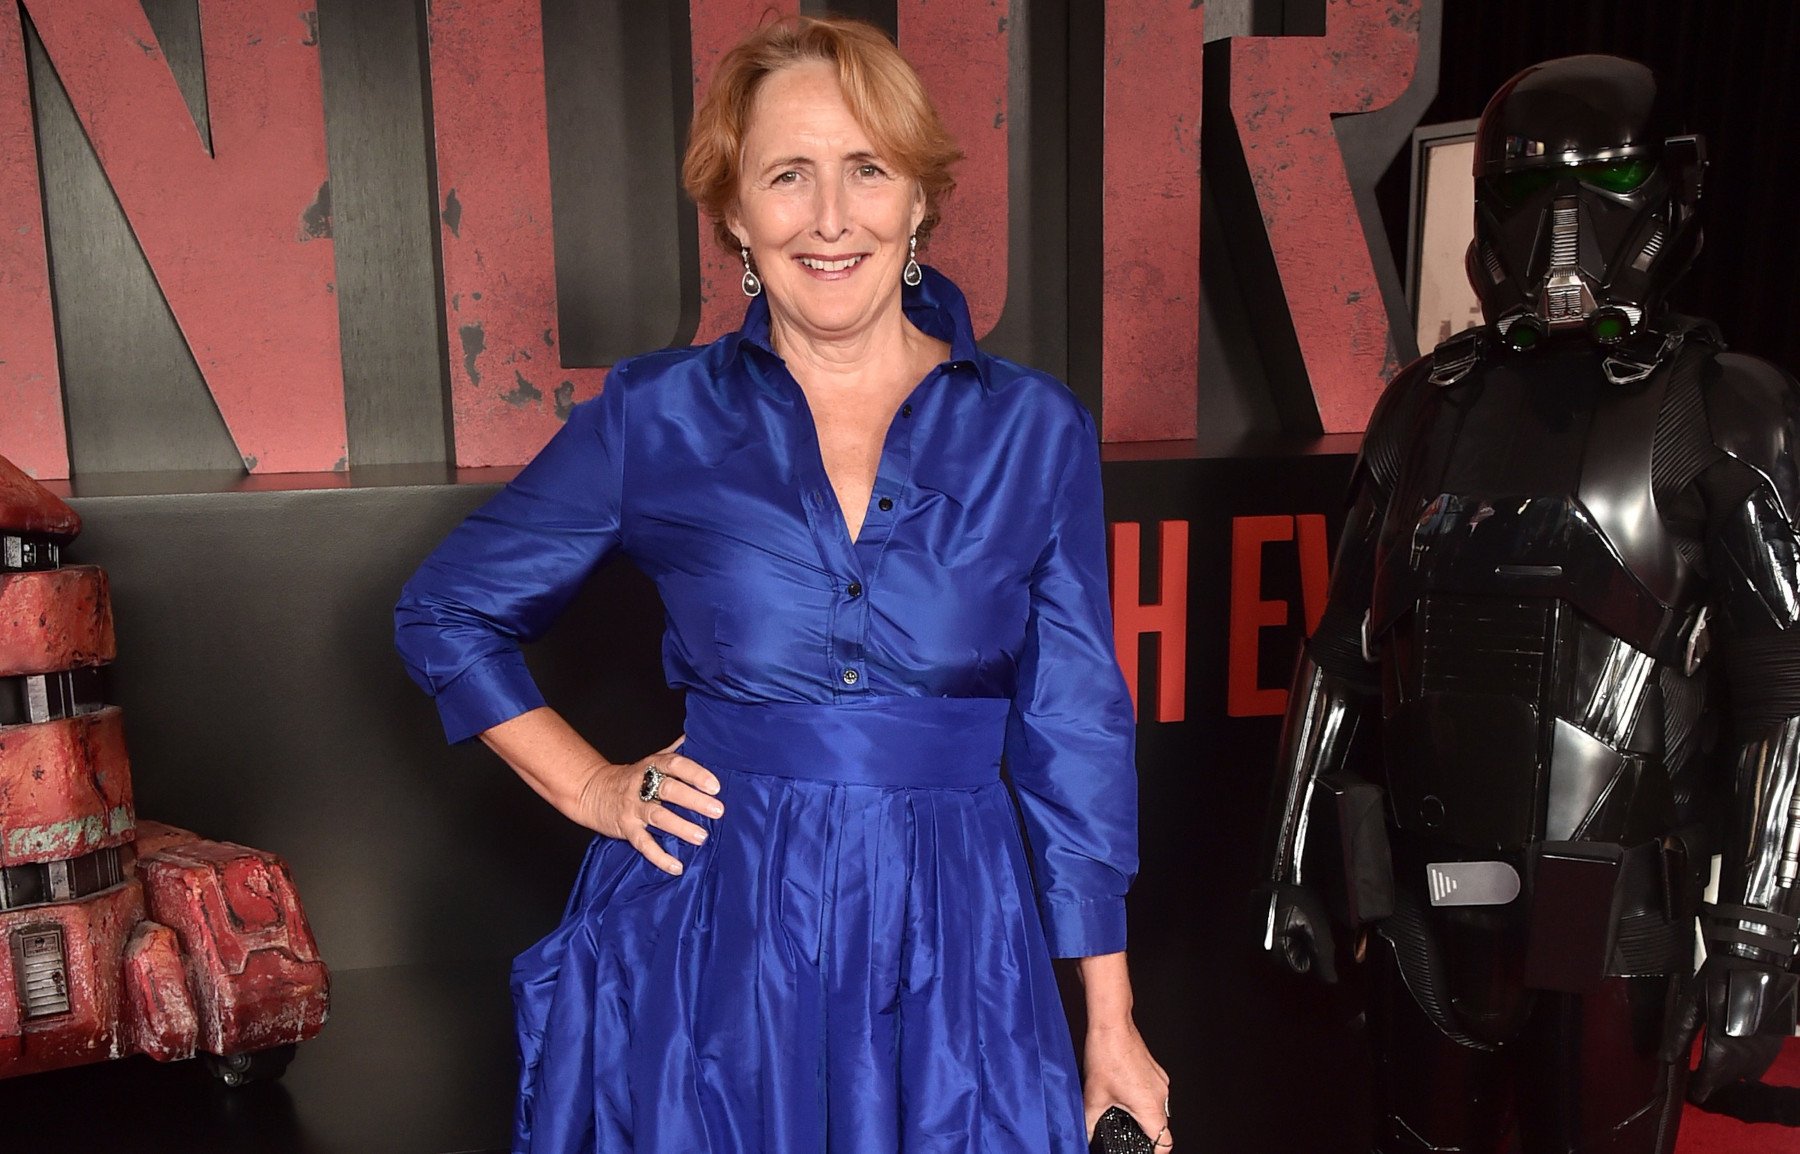 Actor Fiona Shaw, who plays Maarva in 'Andor.' She's wearing a blue, long-sleeved dress on the red carpet and standing next to a Stormtrooper statue and droid statue.